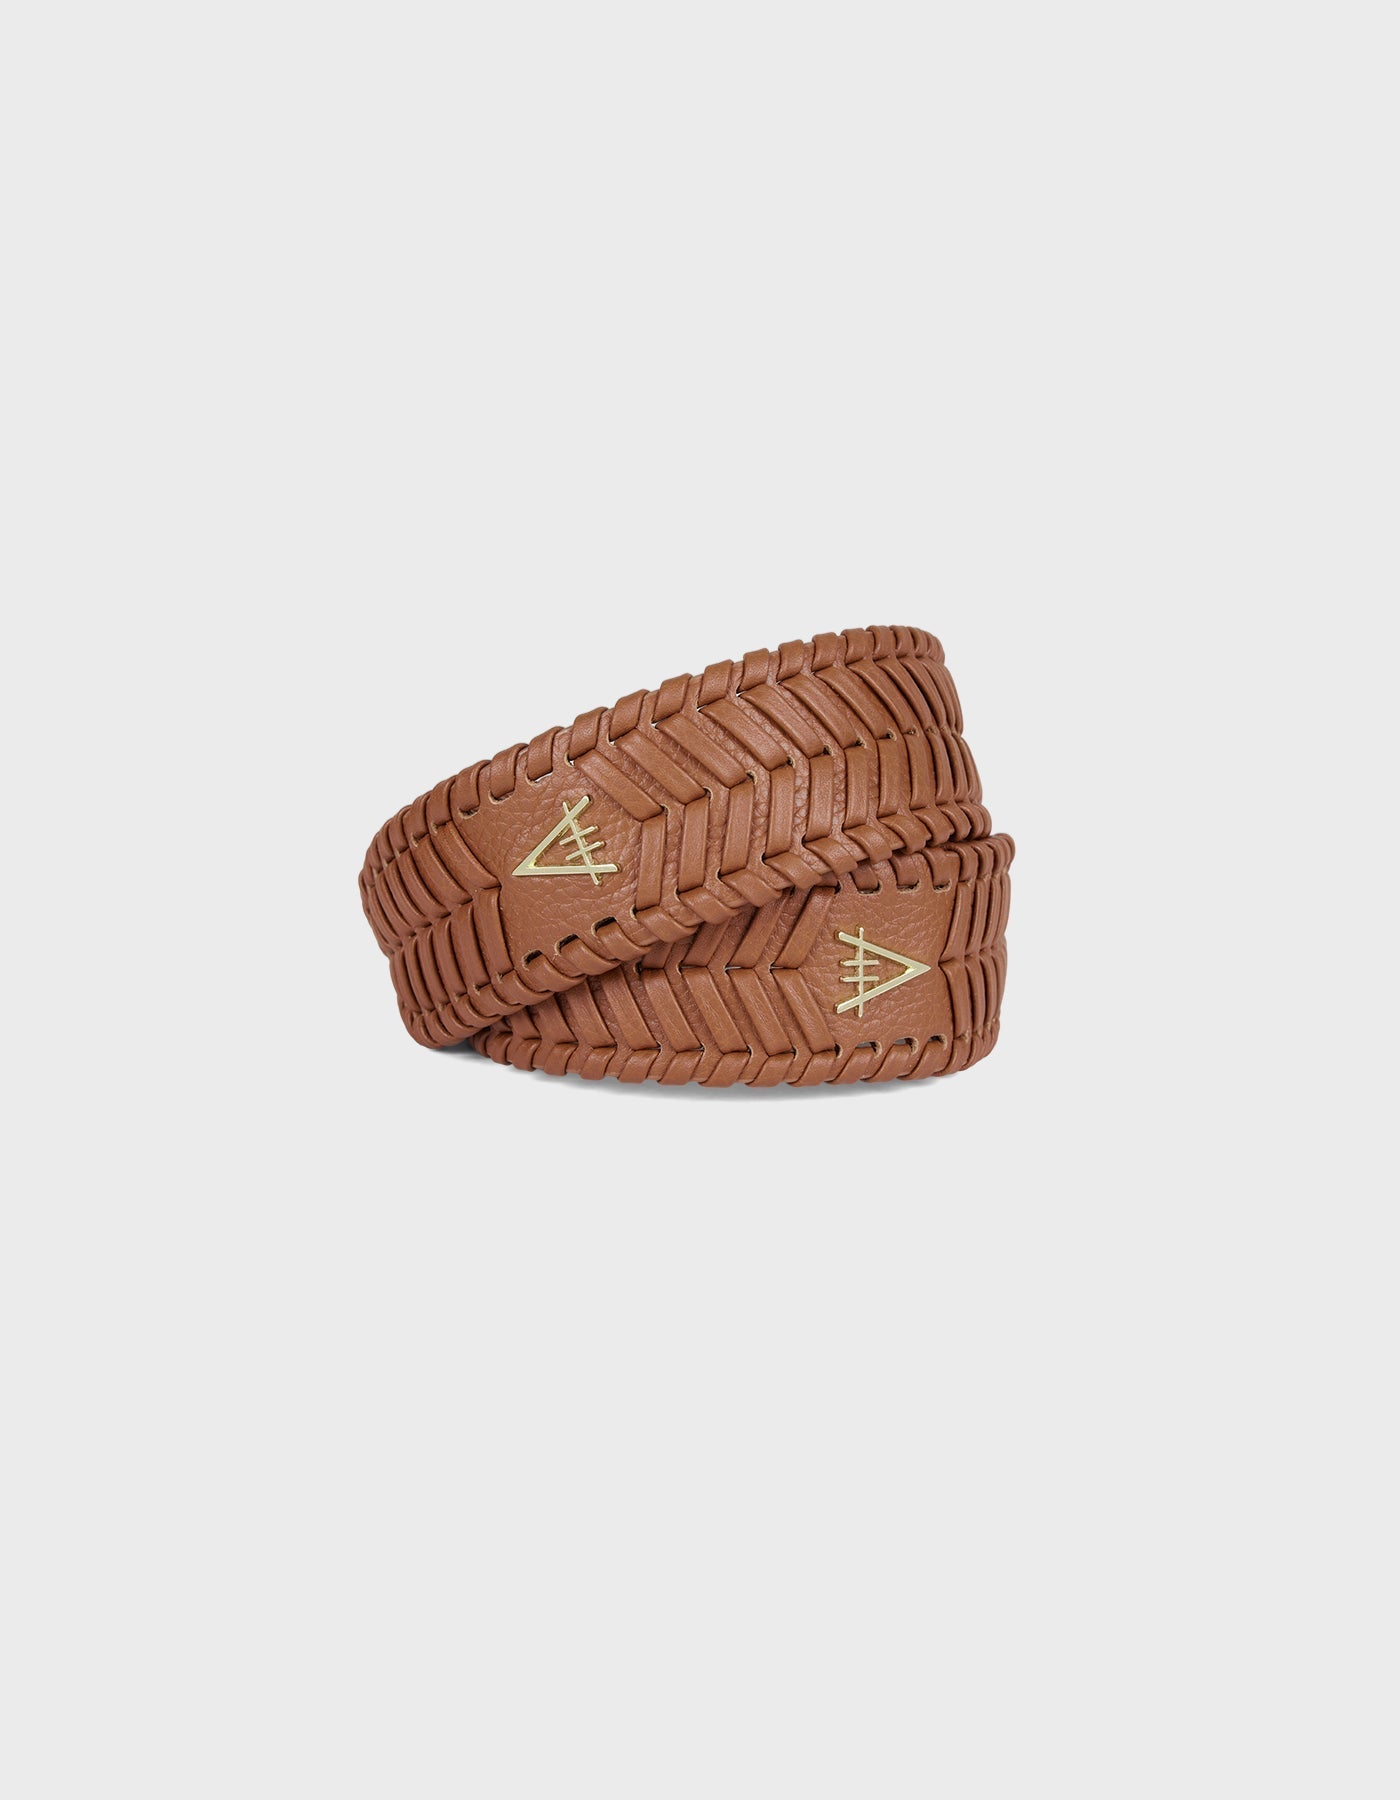 Woven Detail Leather Strap - Finest Quality HiVa Atelier GmbH Leather Accessories